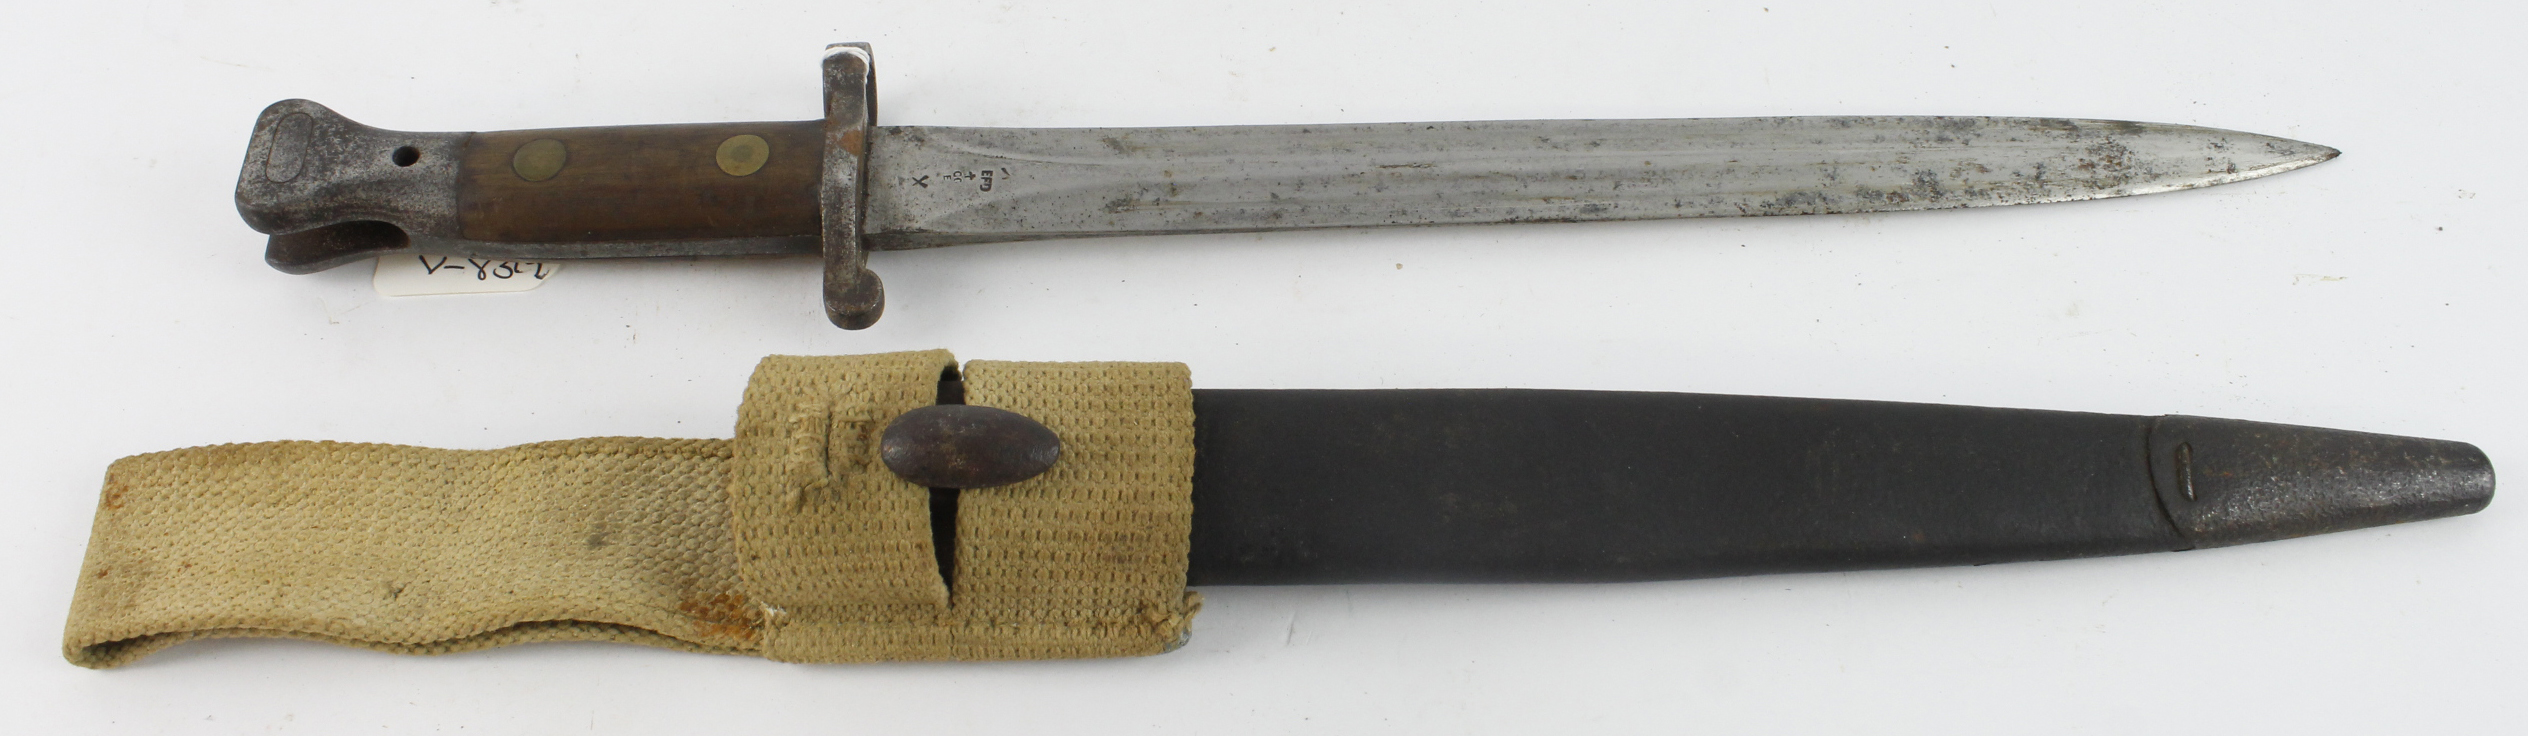 British Pattern 1888 MkII bayonet in its steel mounted leather scabbard with later ME Co frog,